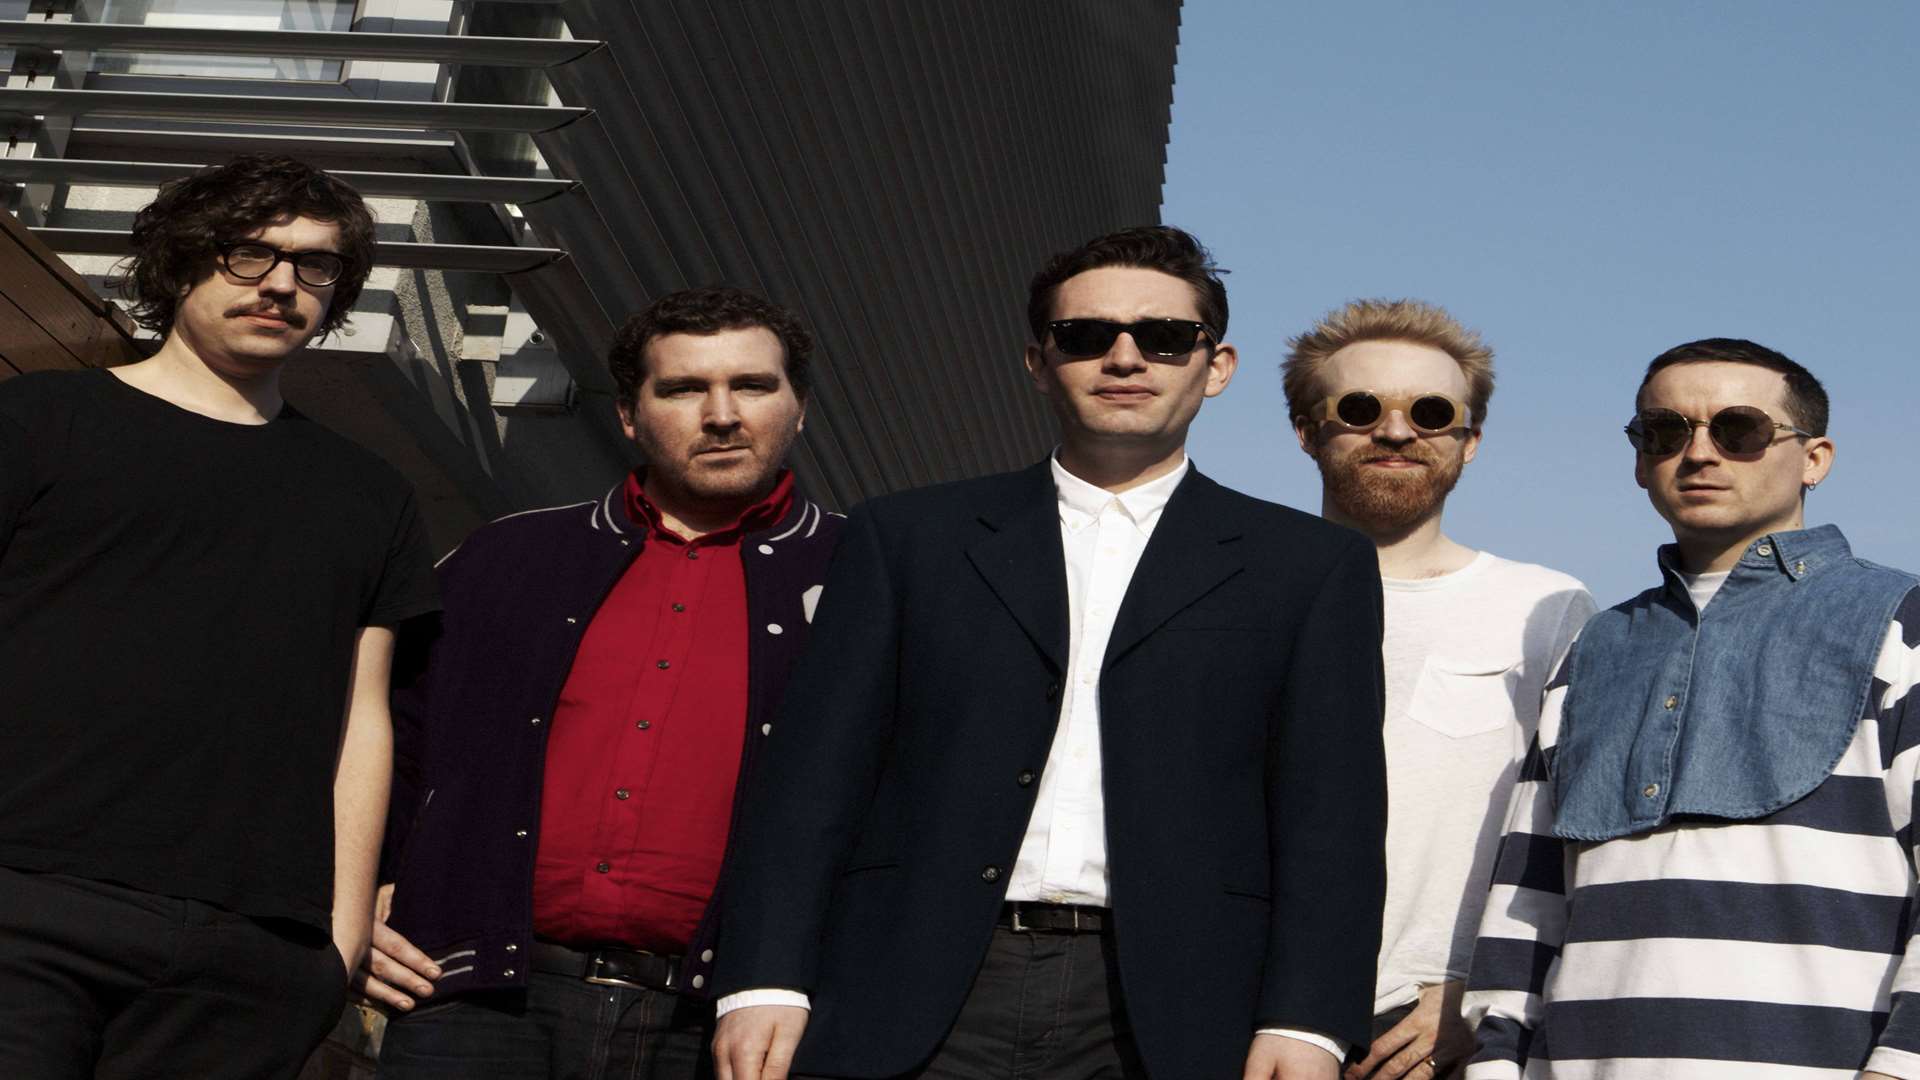 Hot Chip released their sixth album earlier this year